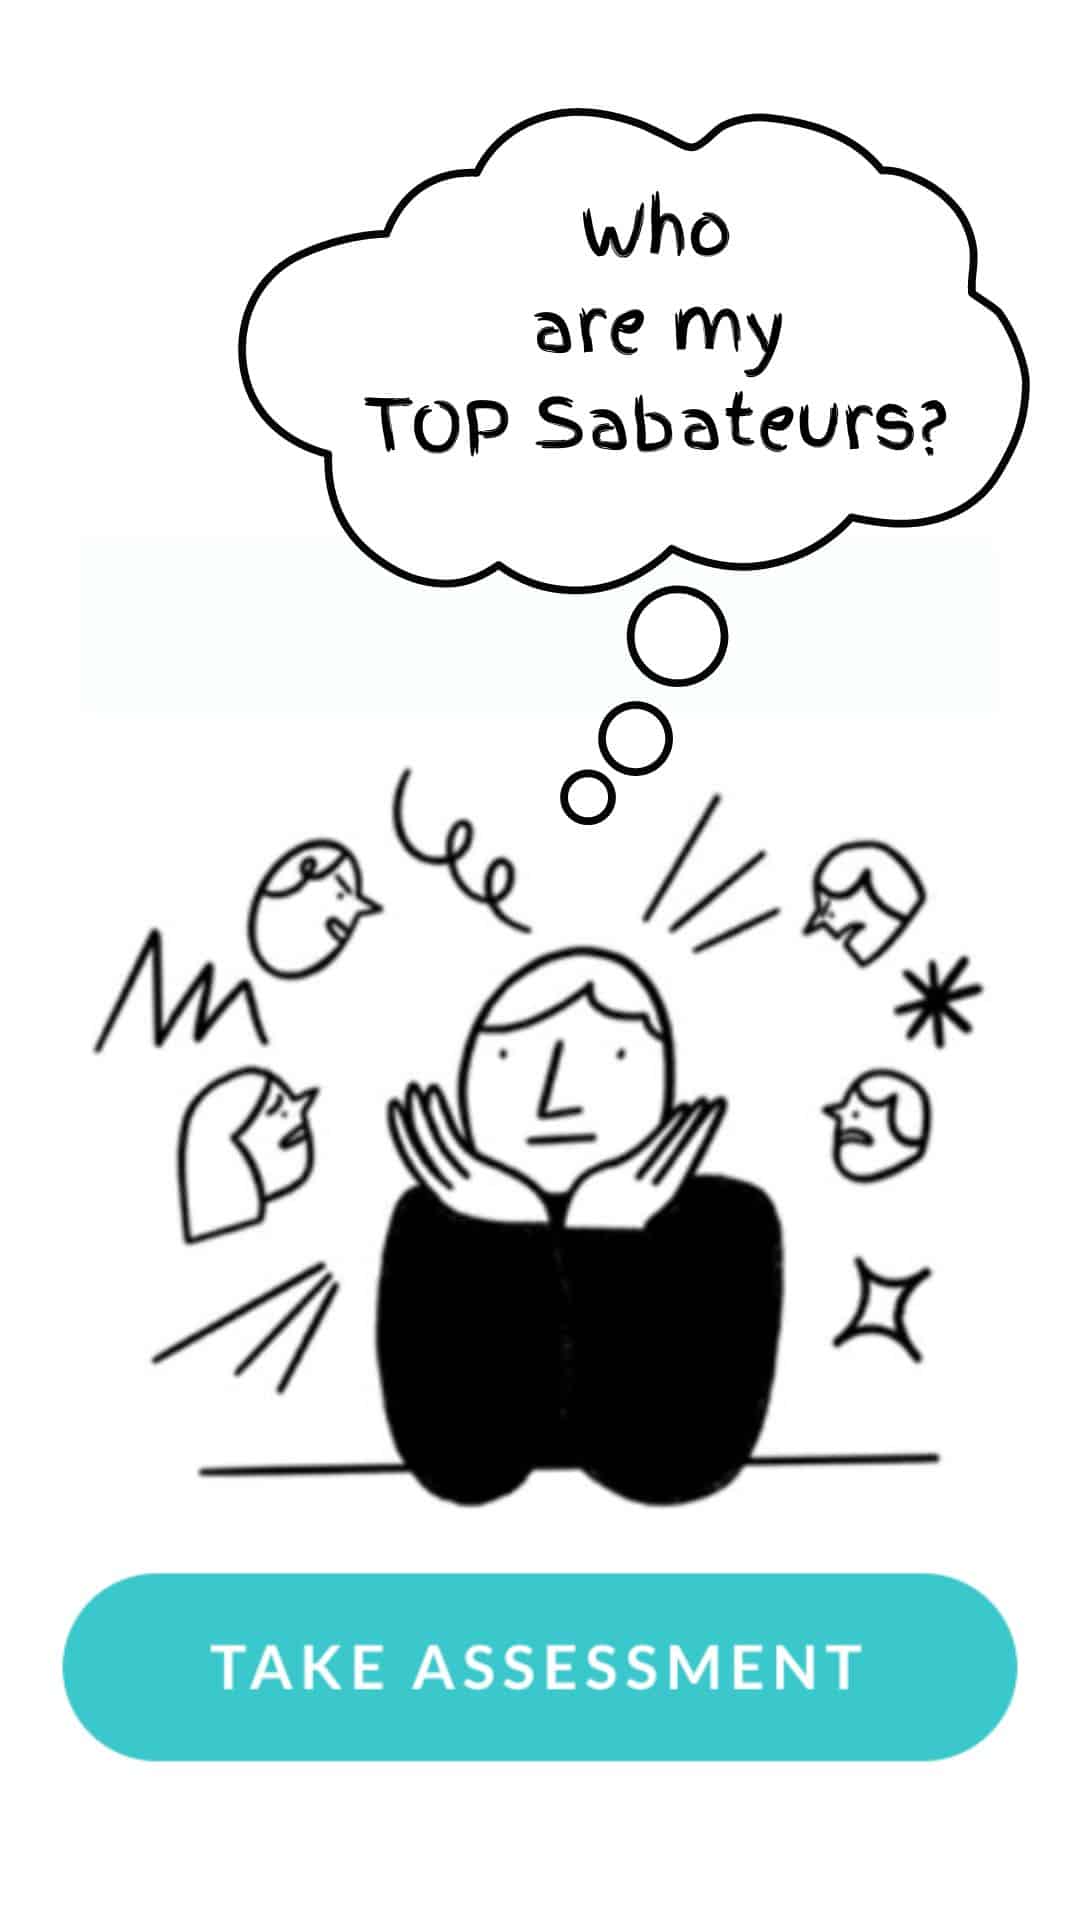 Who are my TOP Sabateurs?